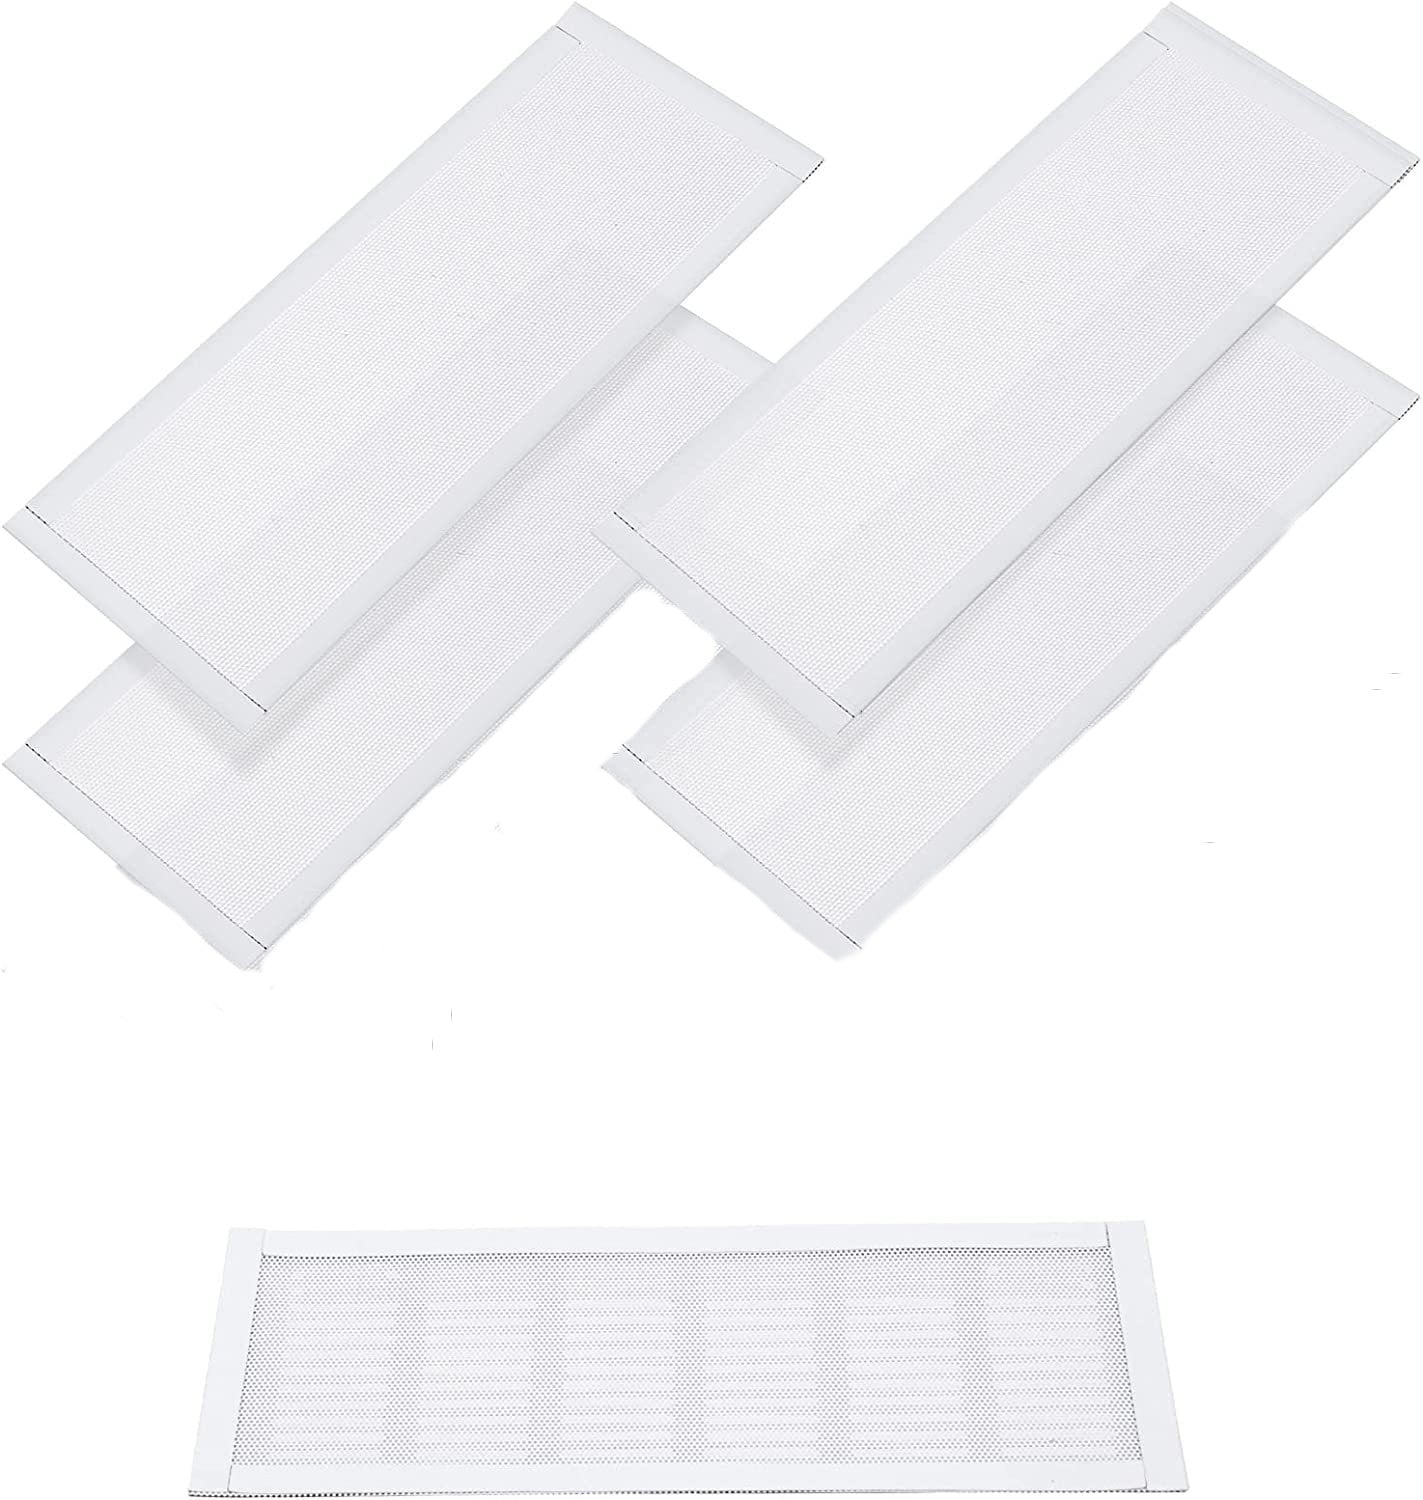 Bomutovy 4 Pack Magnetic Floor Register Vent Covers, 4 inchx10 inch Stronger Magnet Vent Mesh, Vent Screen Trap Perfect for Wall, Ceiling, Home Floor